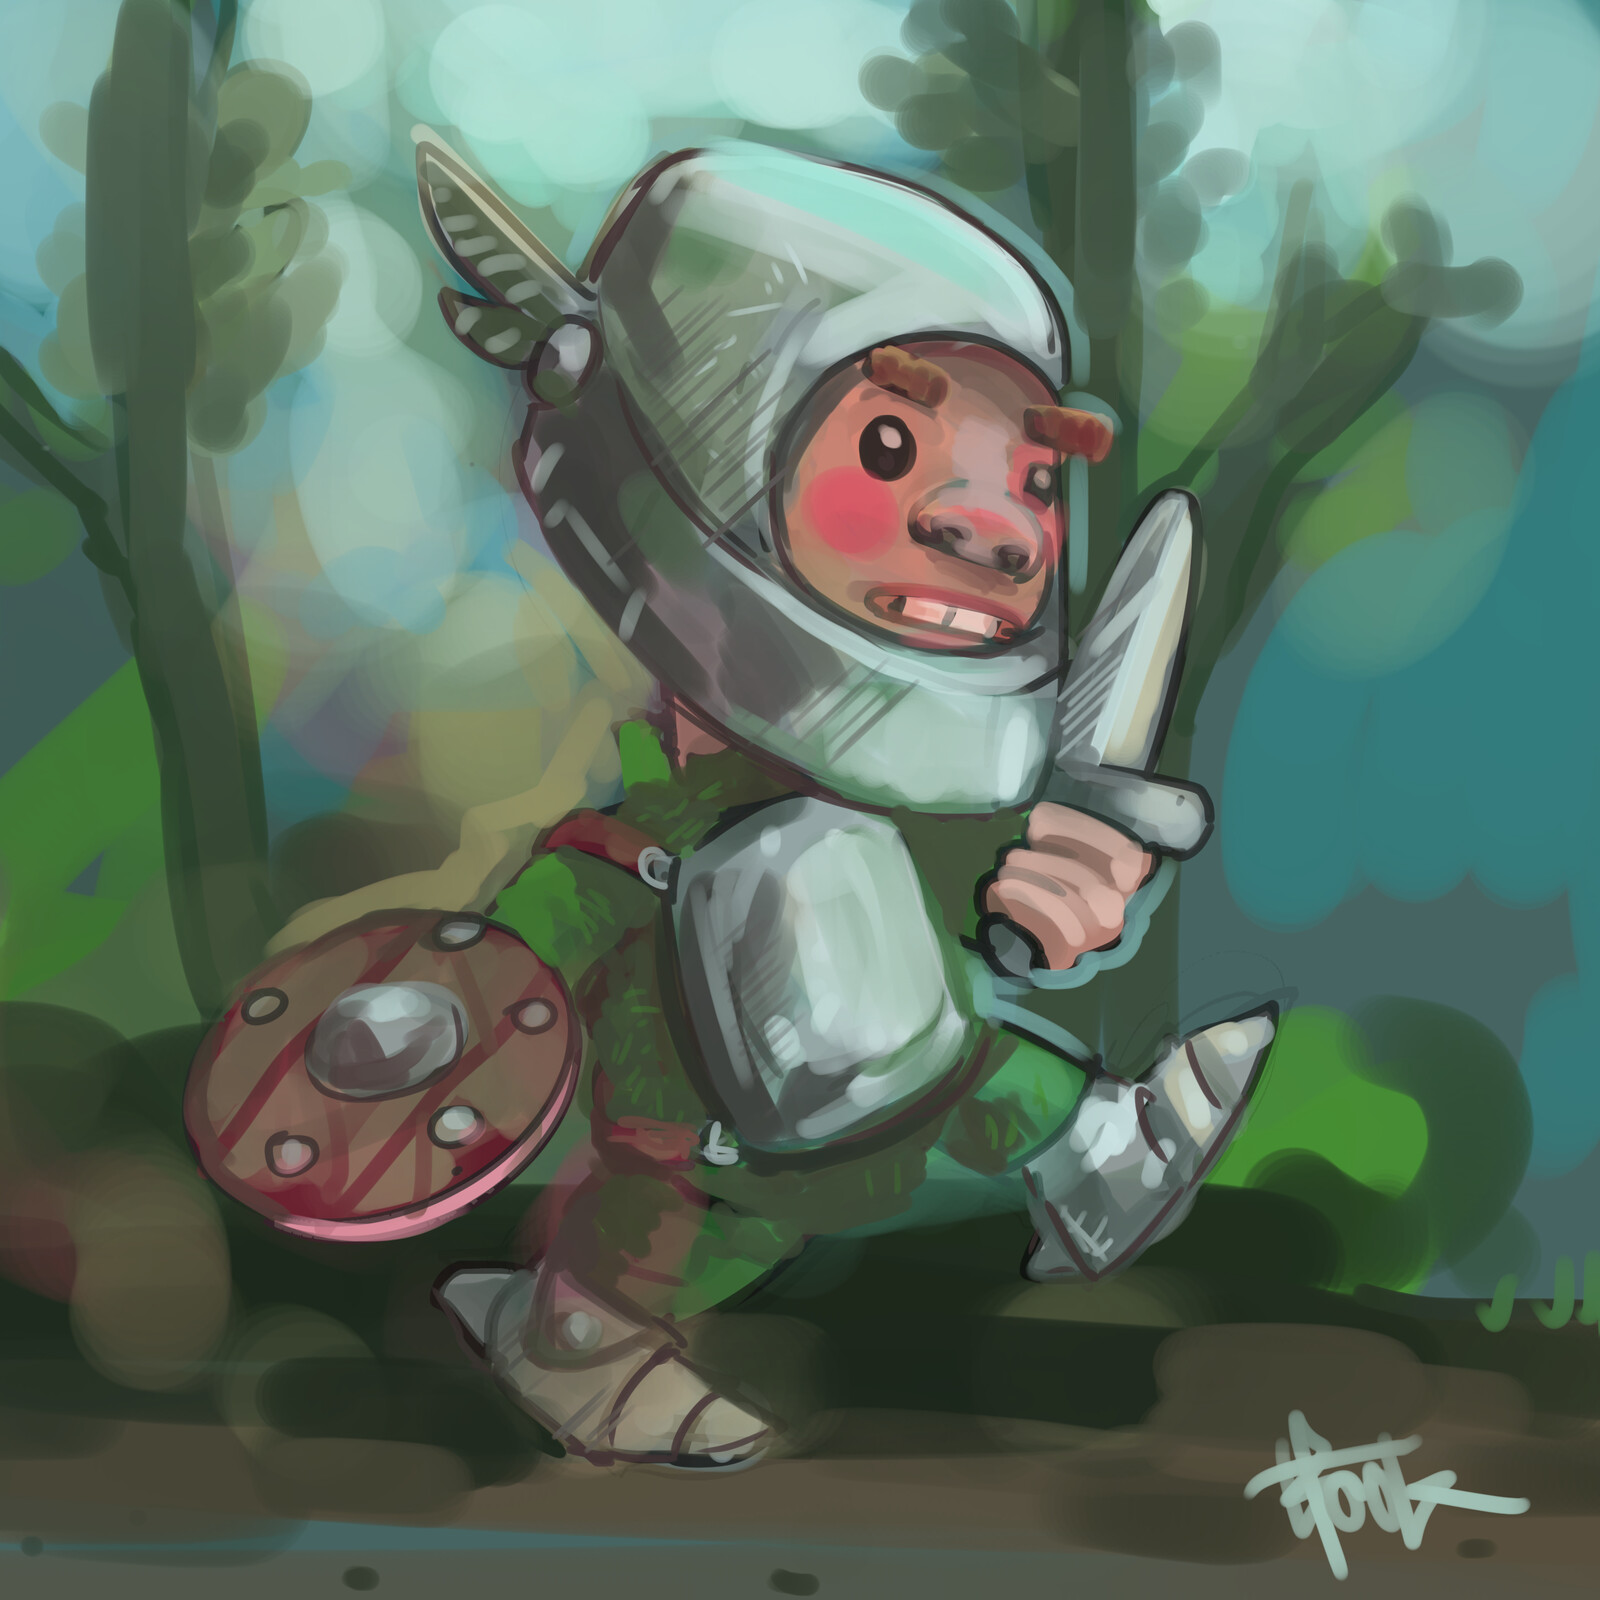 Knight in the forest